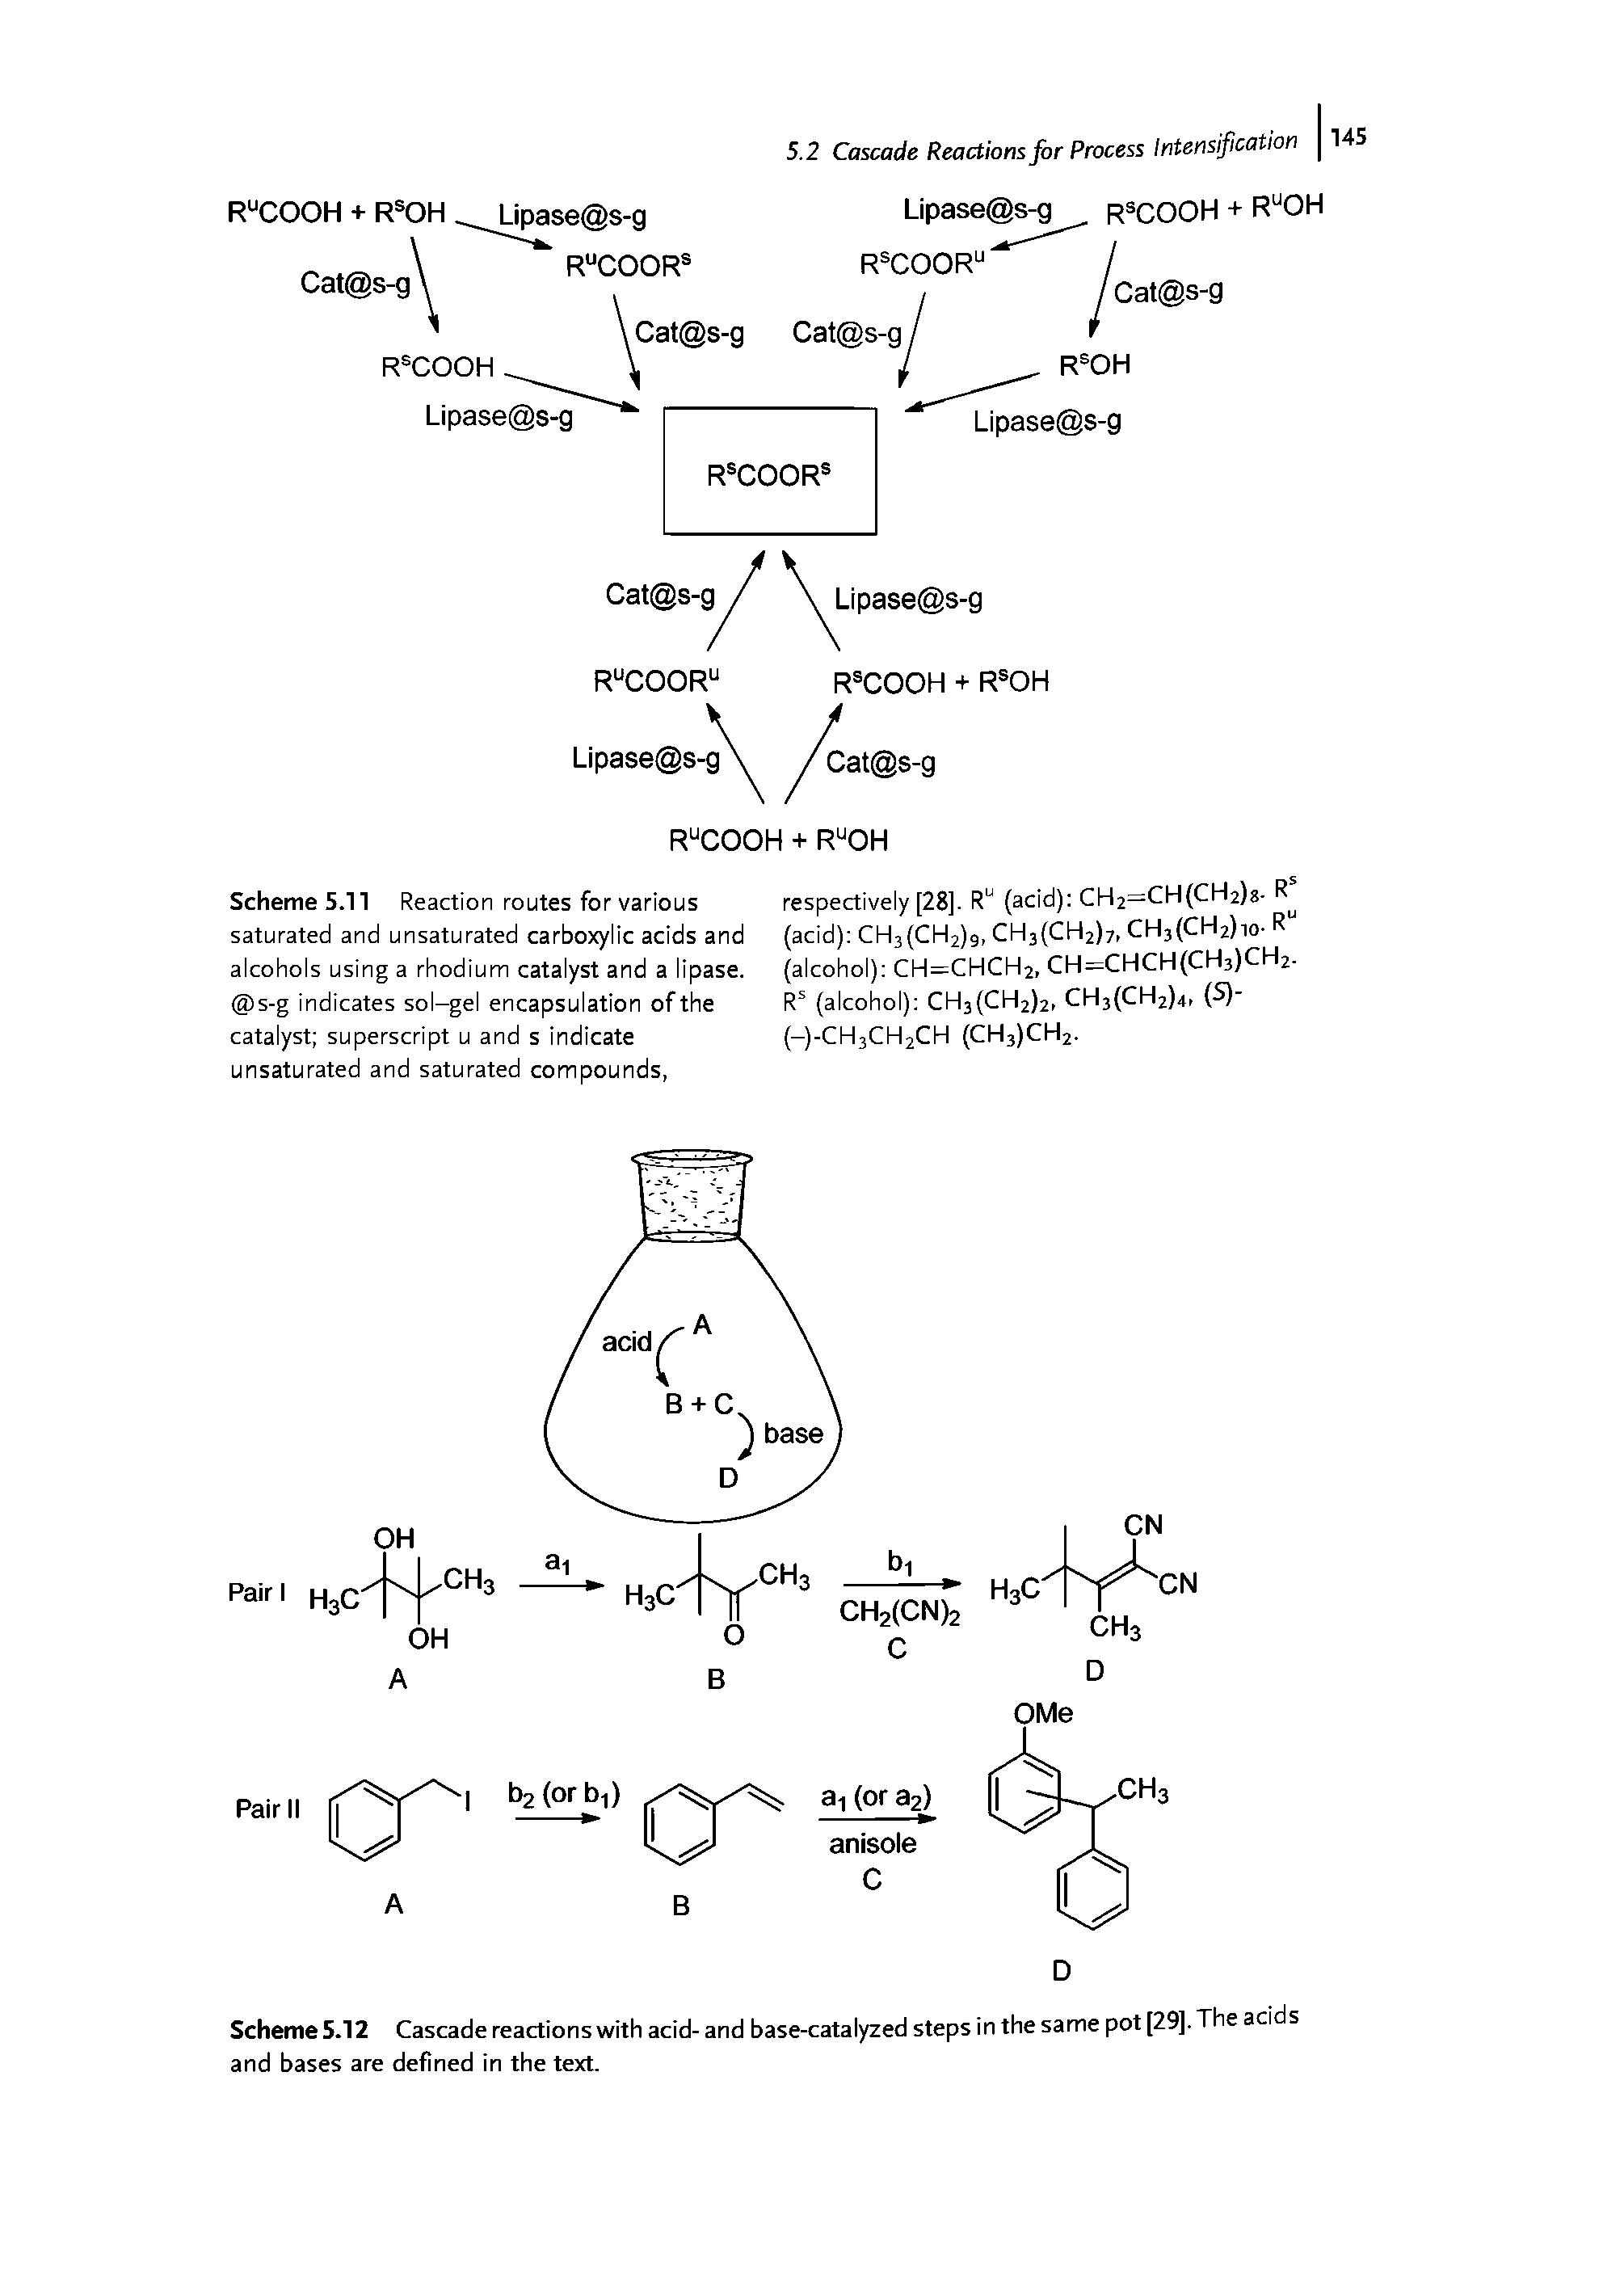 Scheme 5.11 Reaction routes for various saturated and unsaturated carboxylic acids and alcohols using a rhodium catalyst and a lipase. s-g indicates sol-gel encapsulation of the catalyst superscript u and s indicate unsaturated and saturated compounds,...